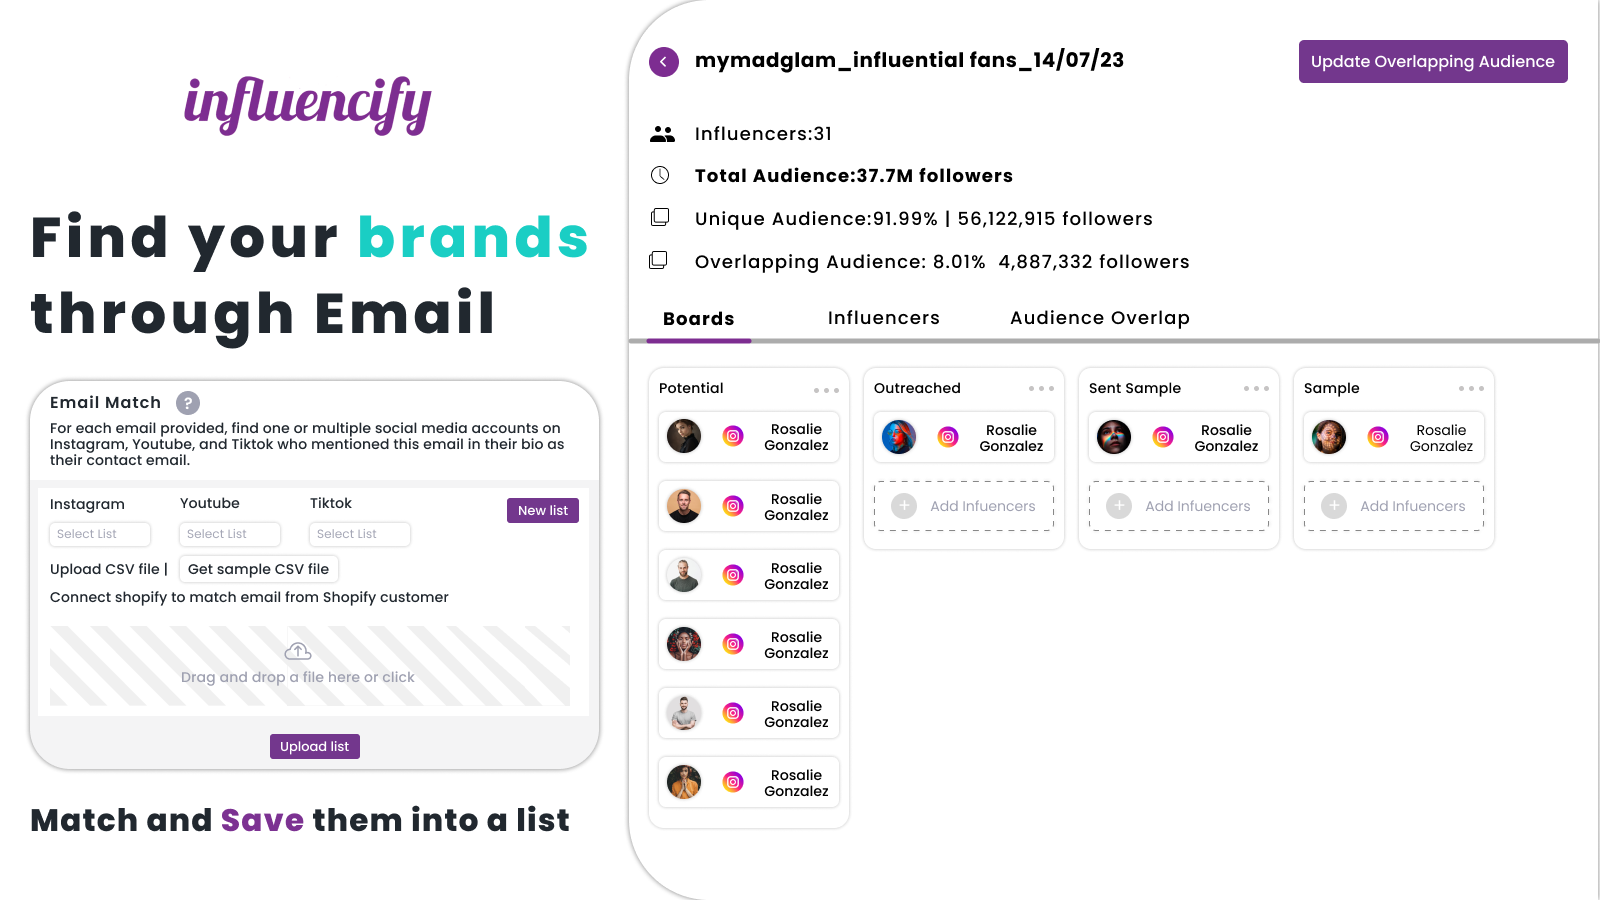 Find Brands by using Email Match tool